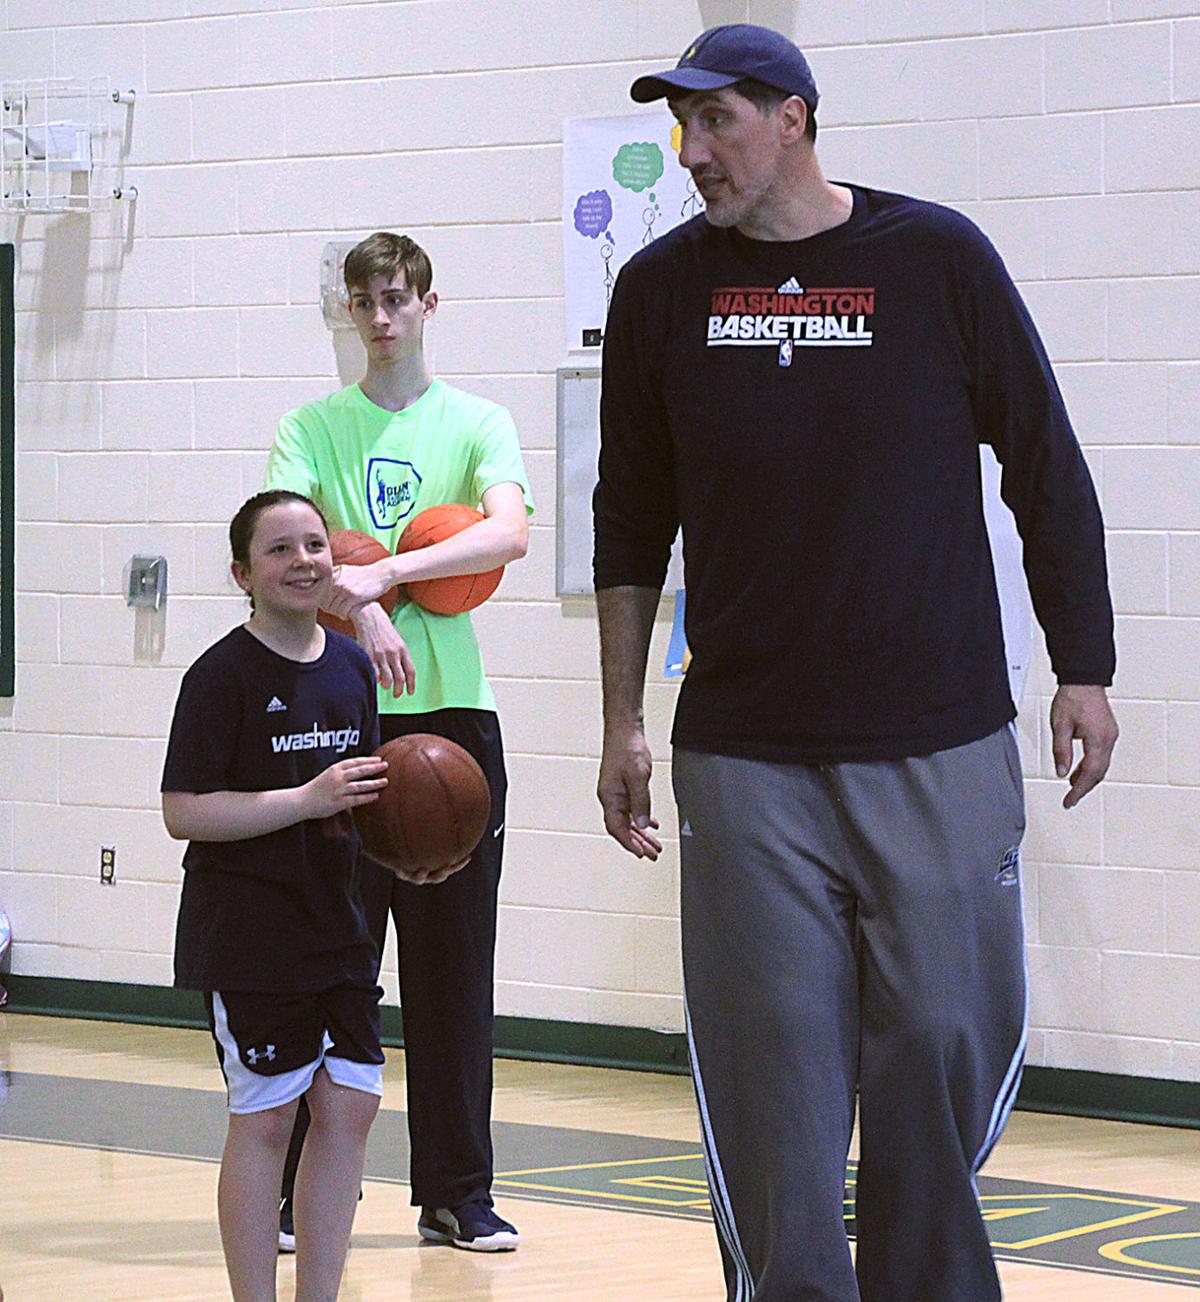 Former NBA player Gheorghe Muresan tosses a basketball to a child